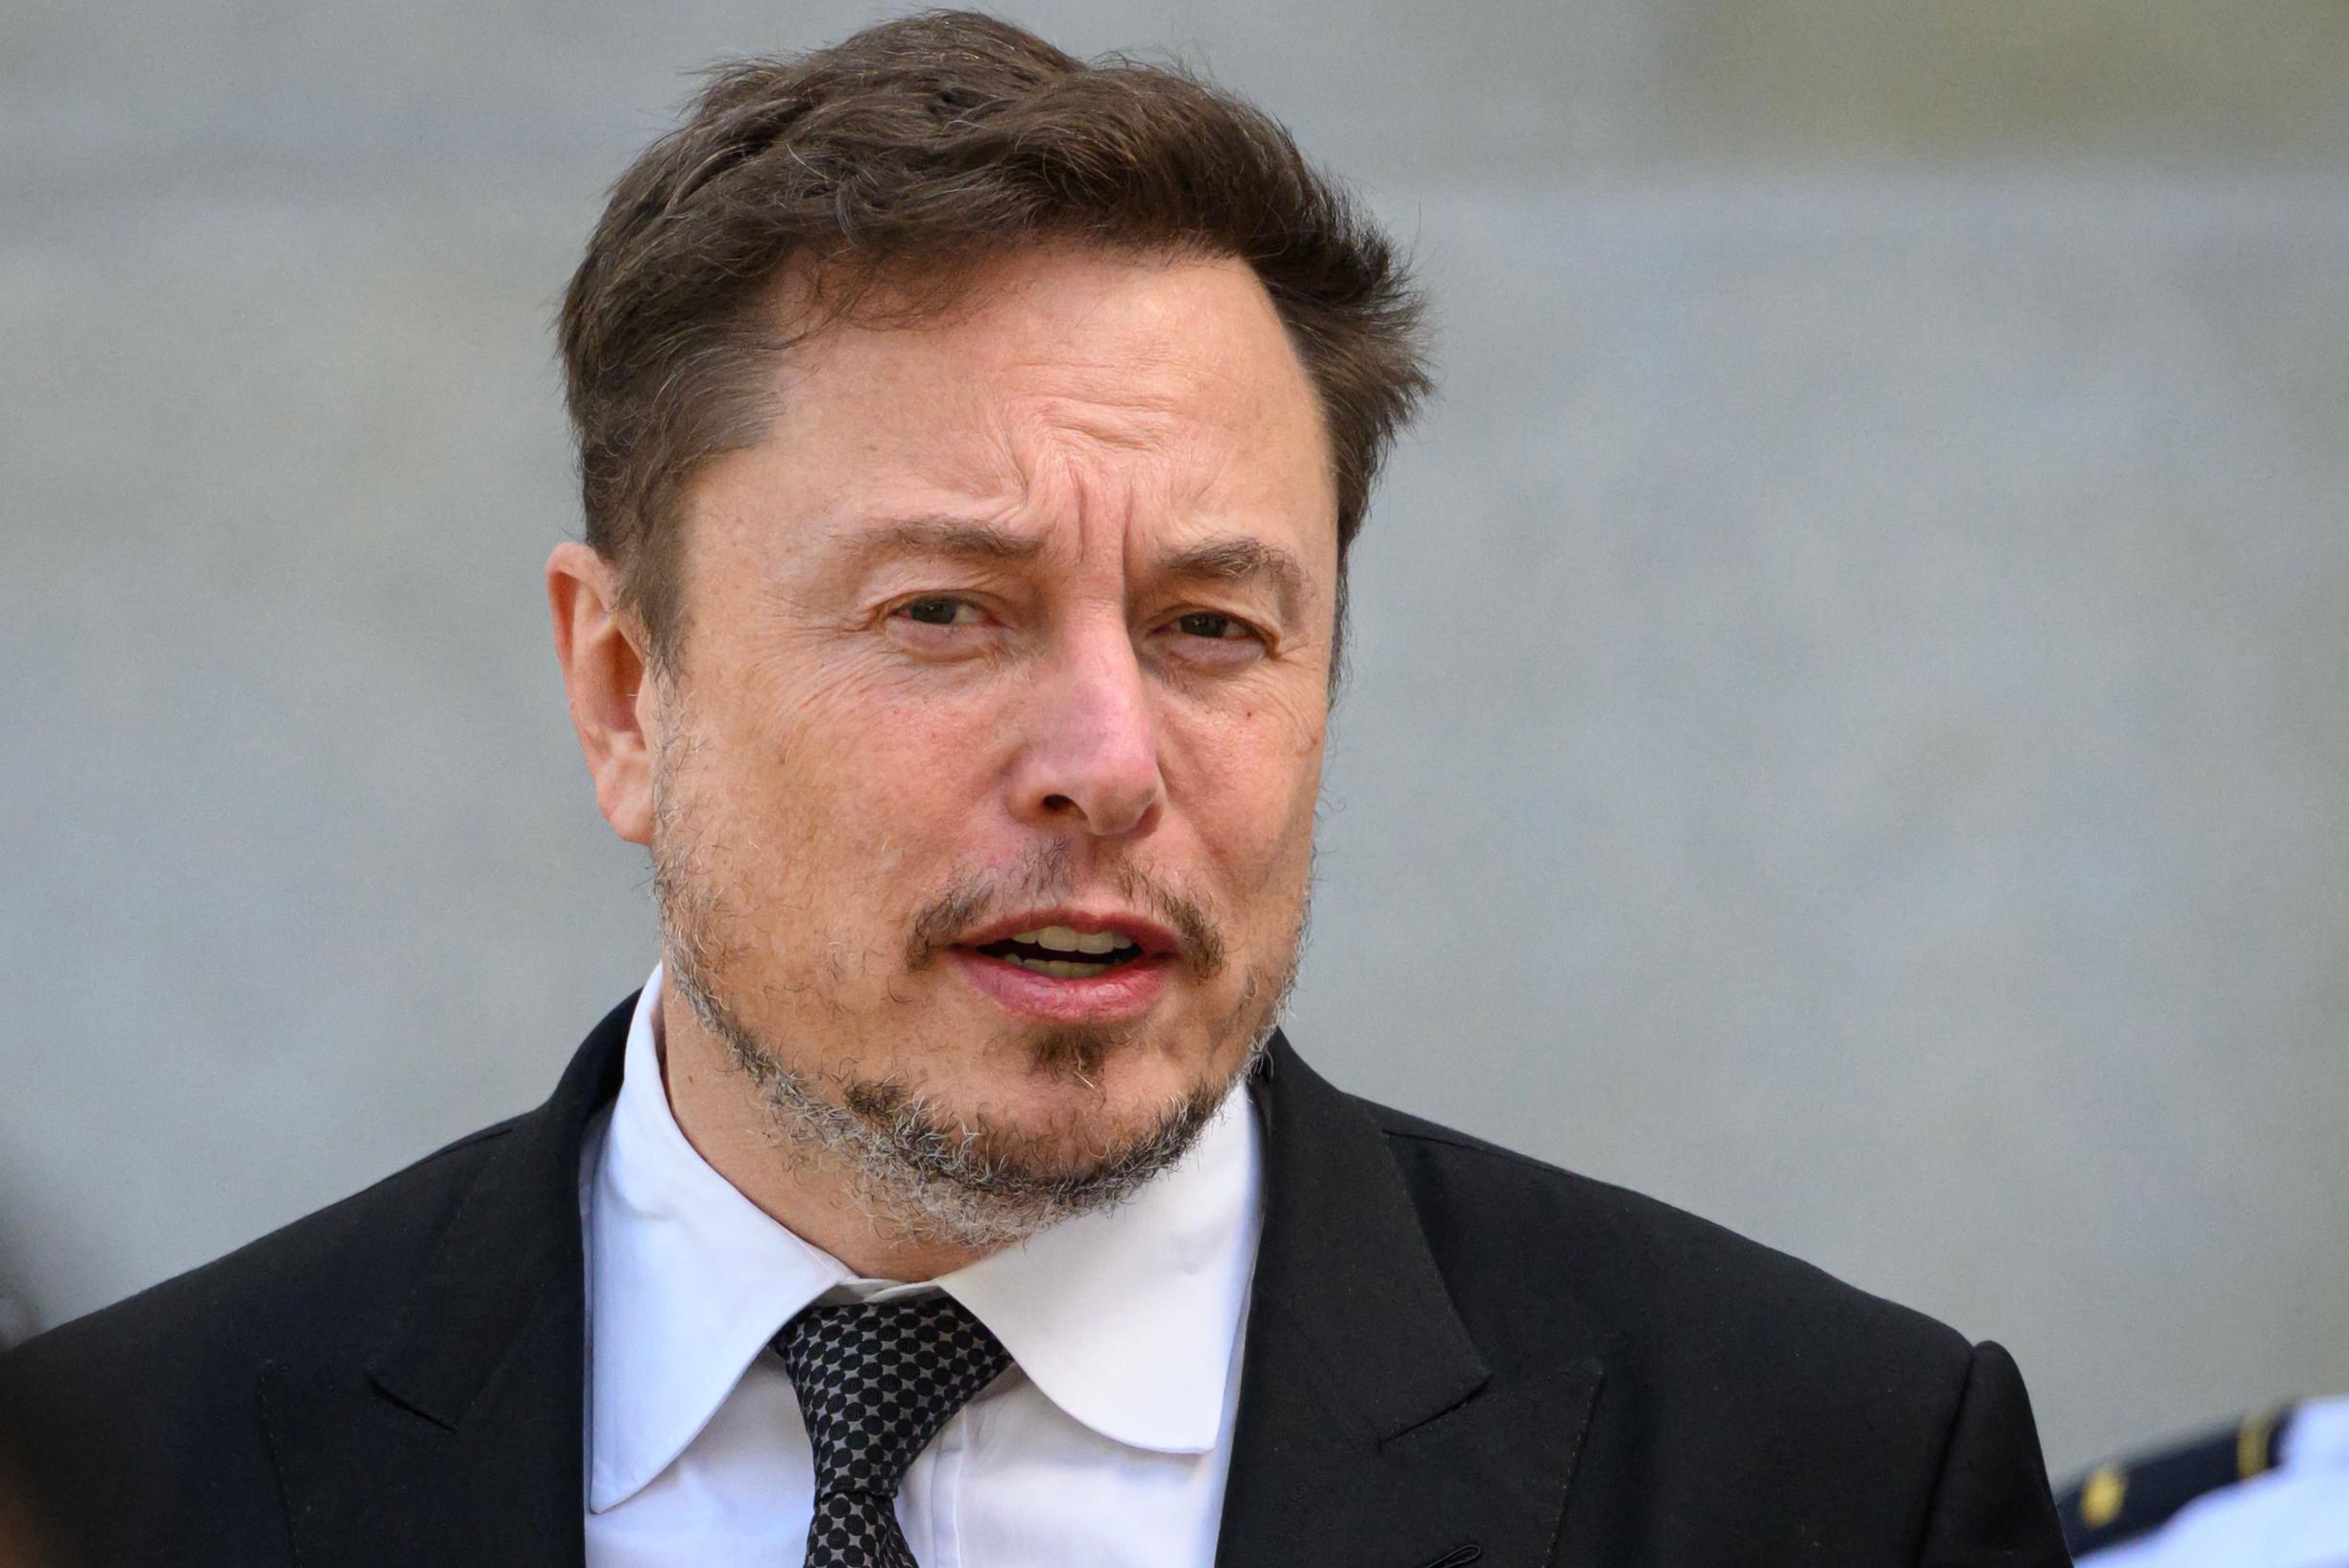 White House Slams Musk over Allegations of Anti-Semitism and Fascist Propaganda